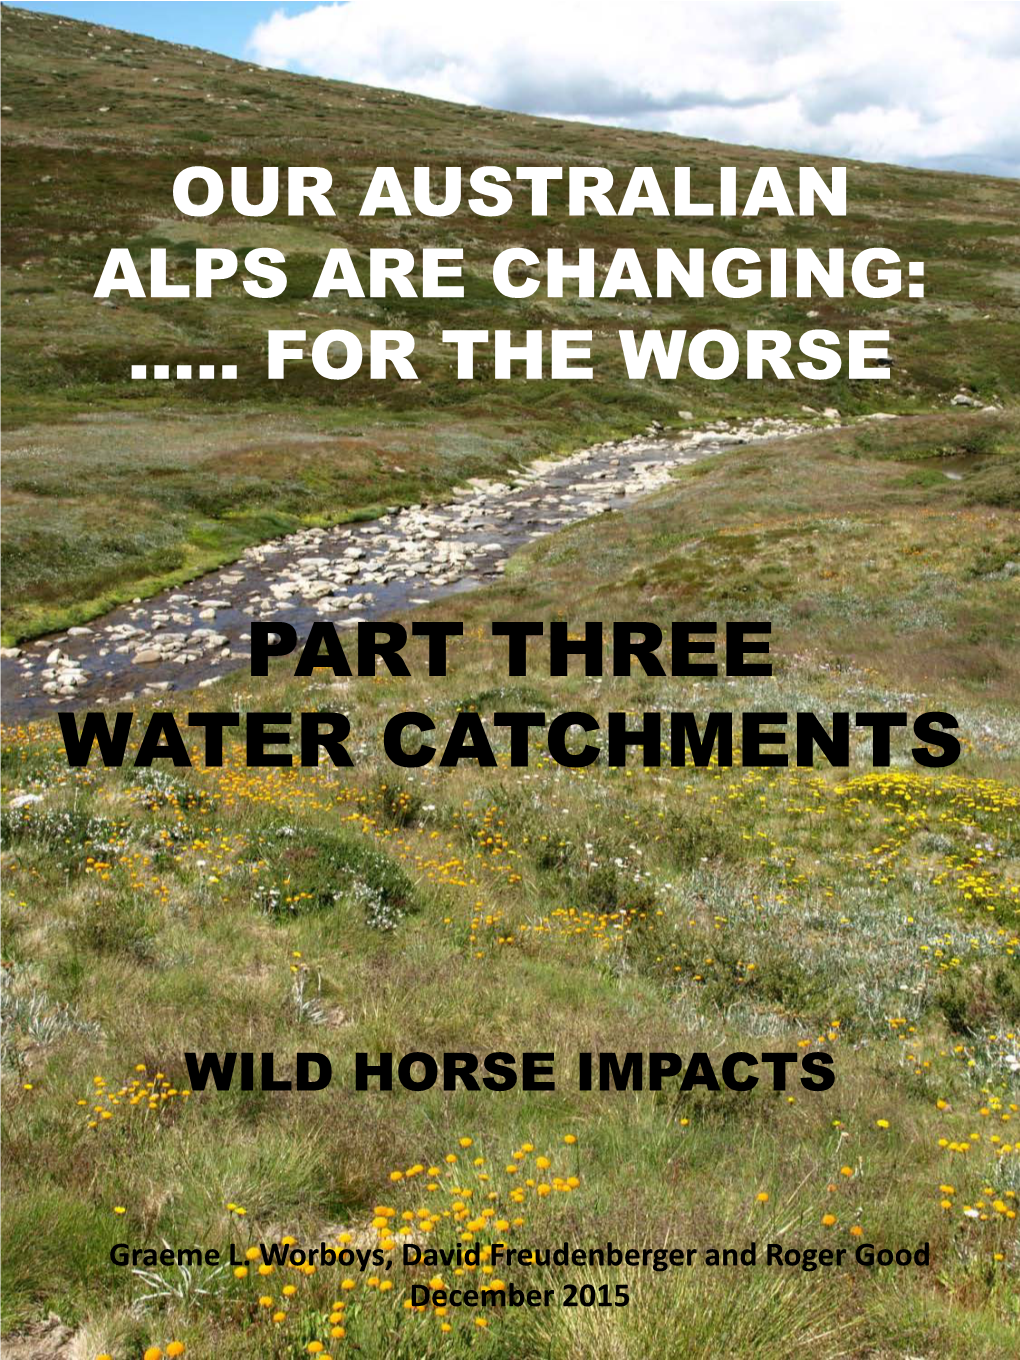 CLIMATE CHANGE IMPACTS: Less Alps Water for the Snowy, Murray and Murrumbidgee Rivers